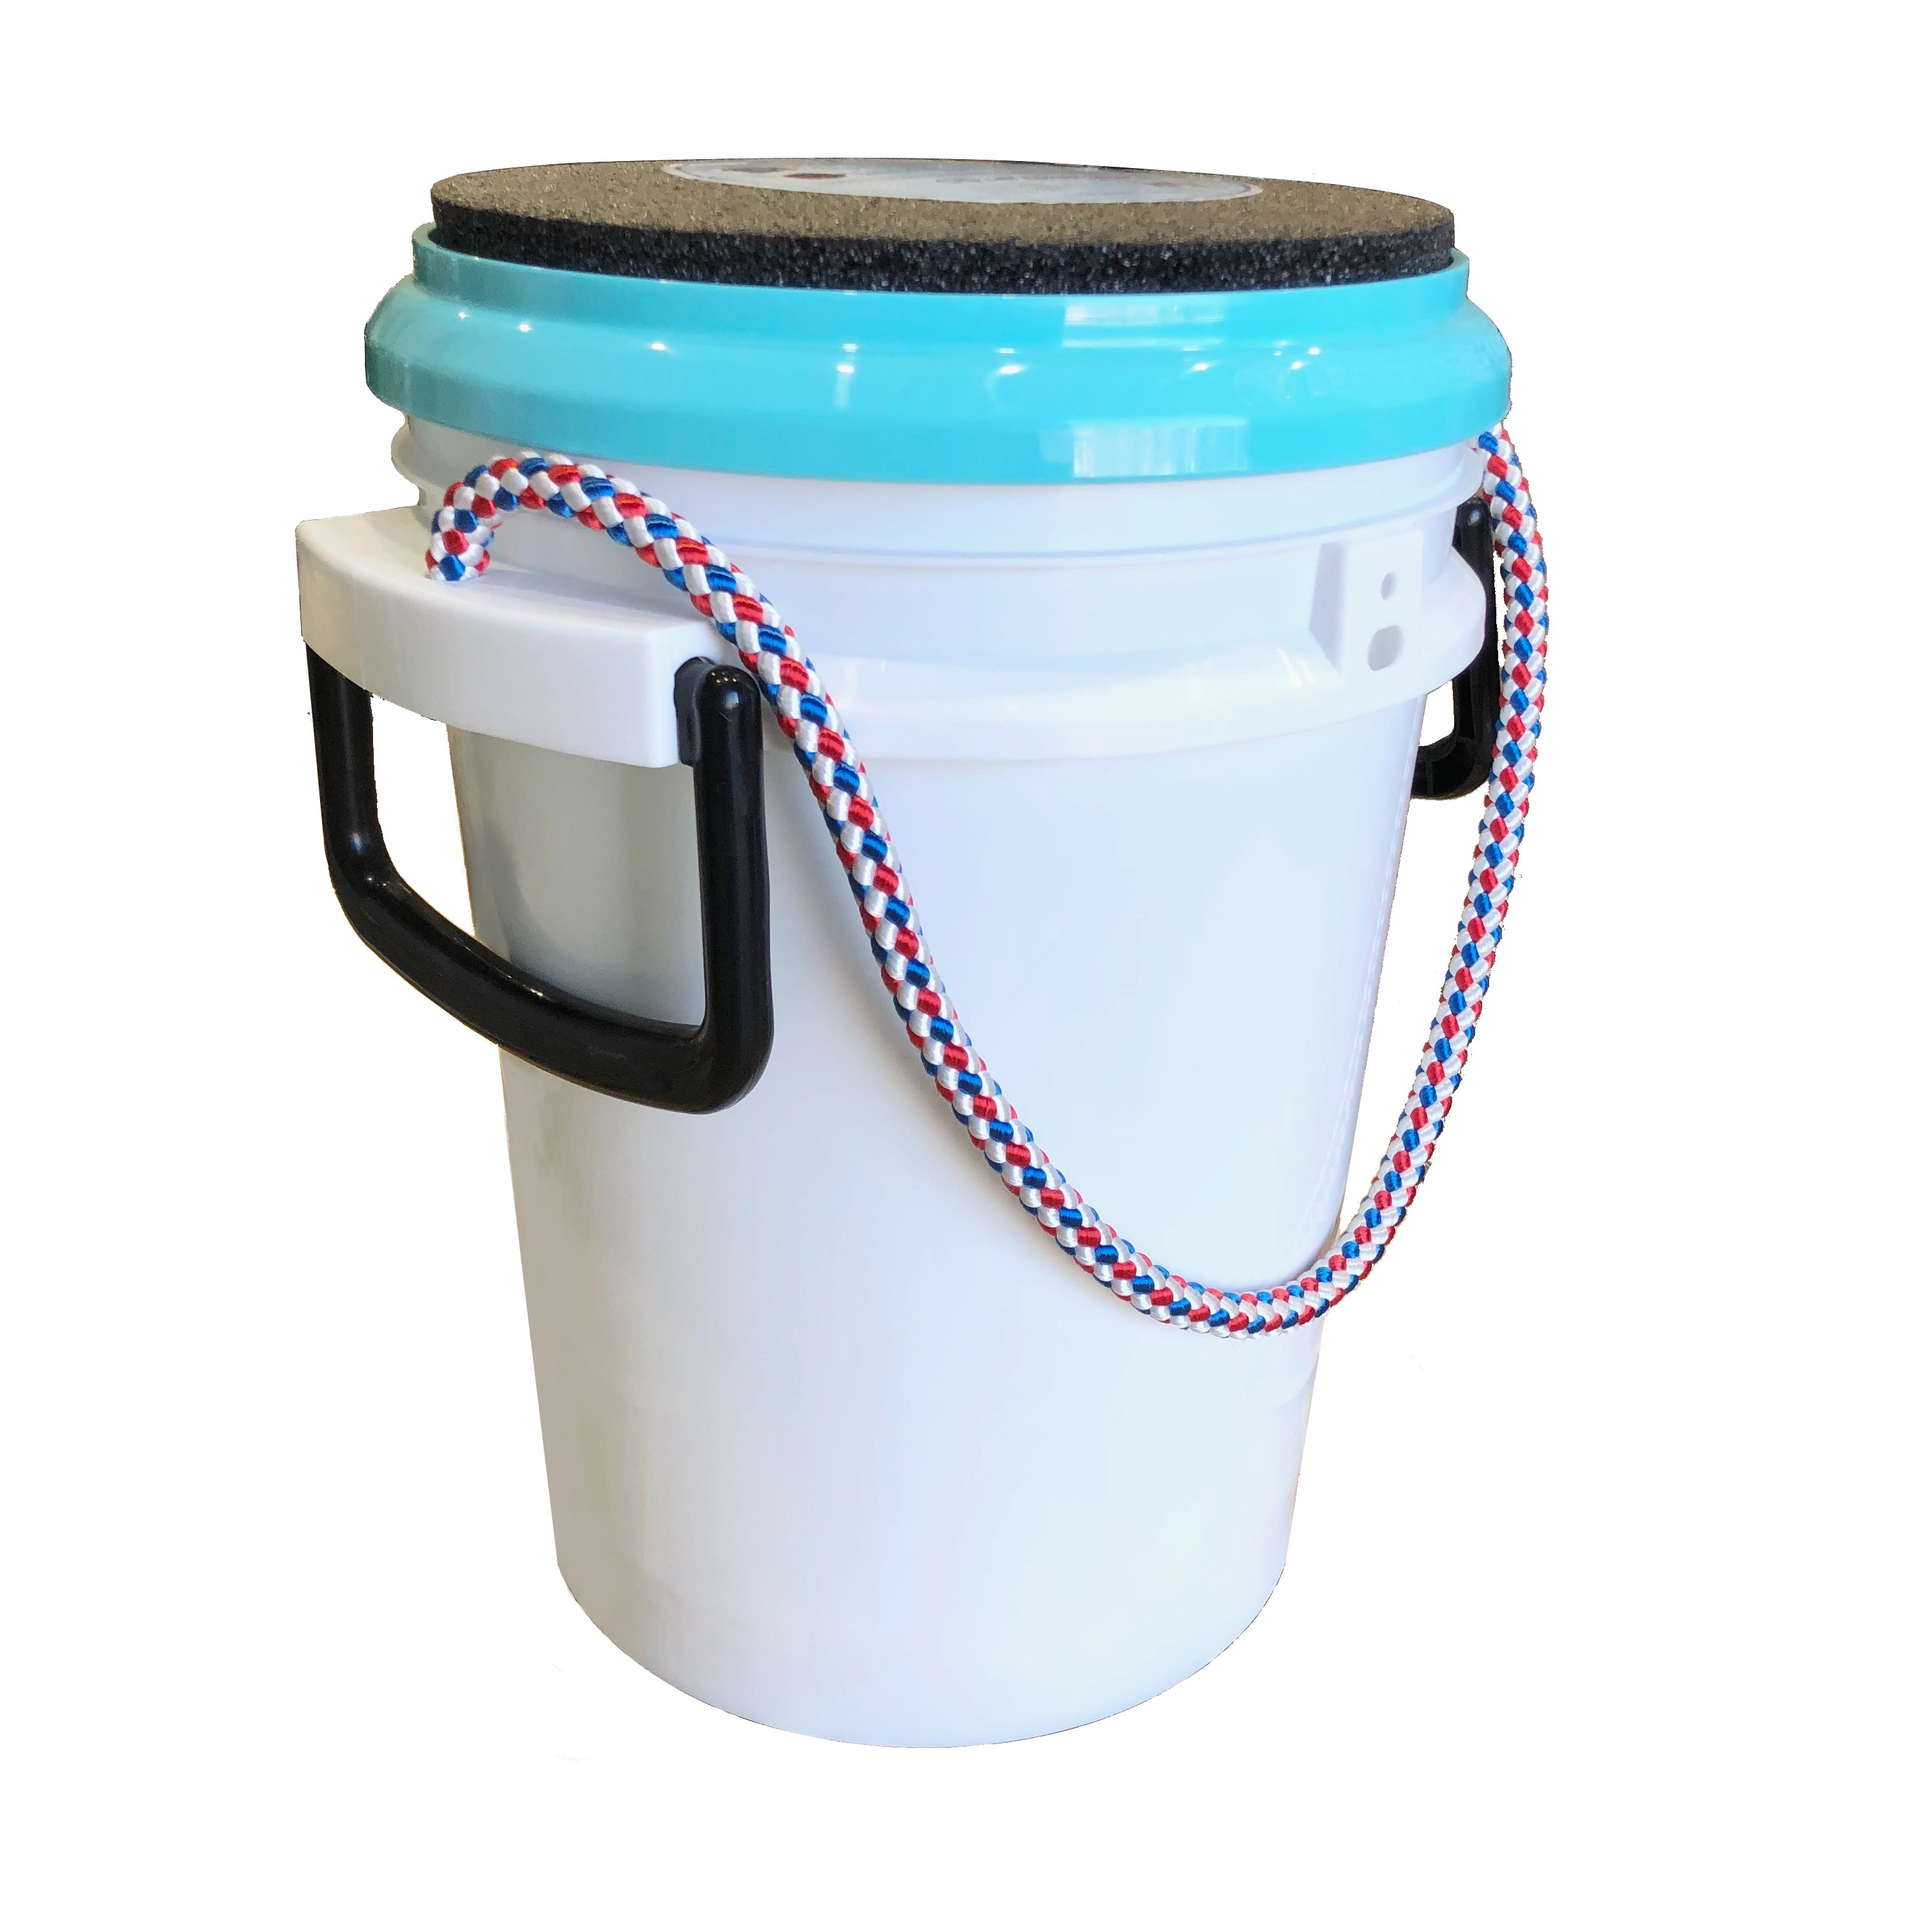 Lee Fisher Sports iSmart Padded Bucket Seat -Rope Handle, Thick Foam for Your Comfort - White